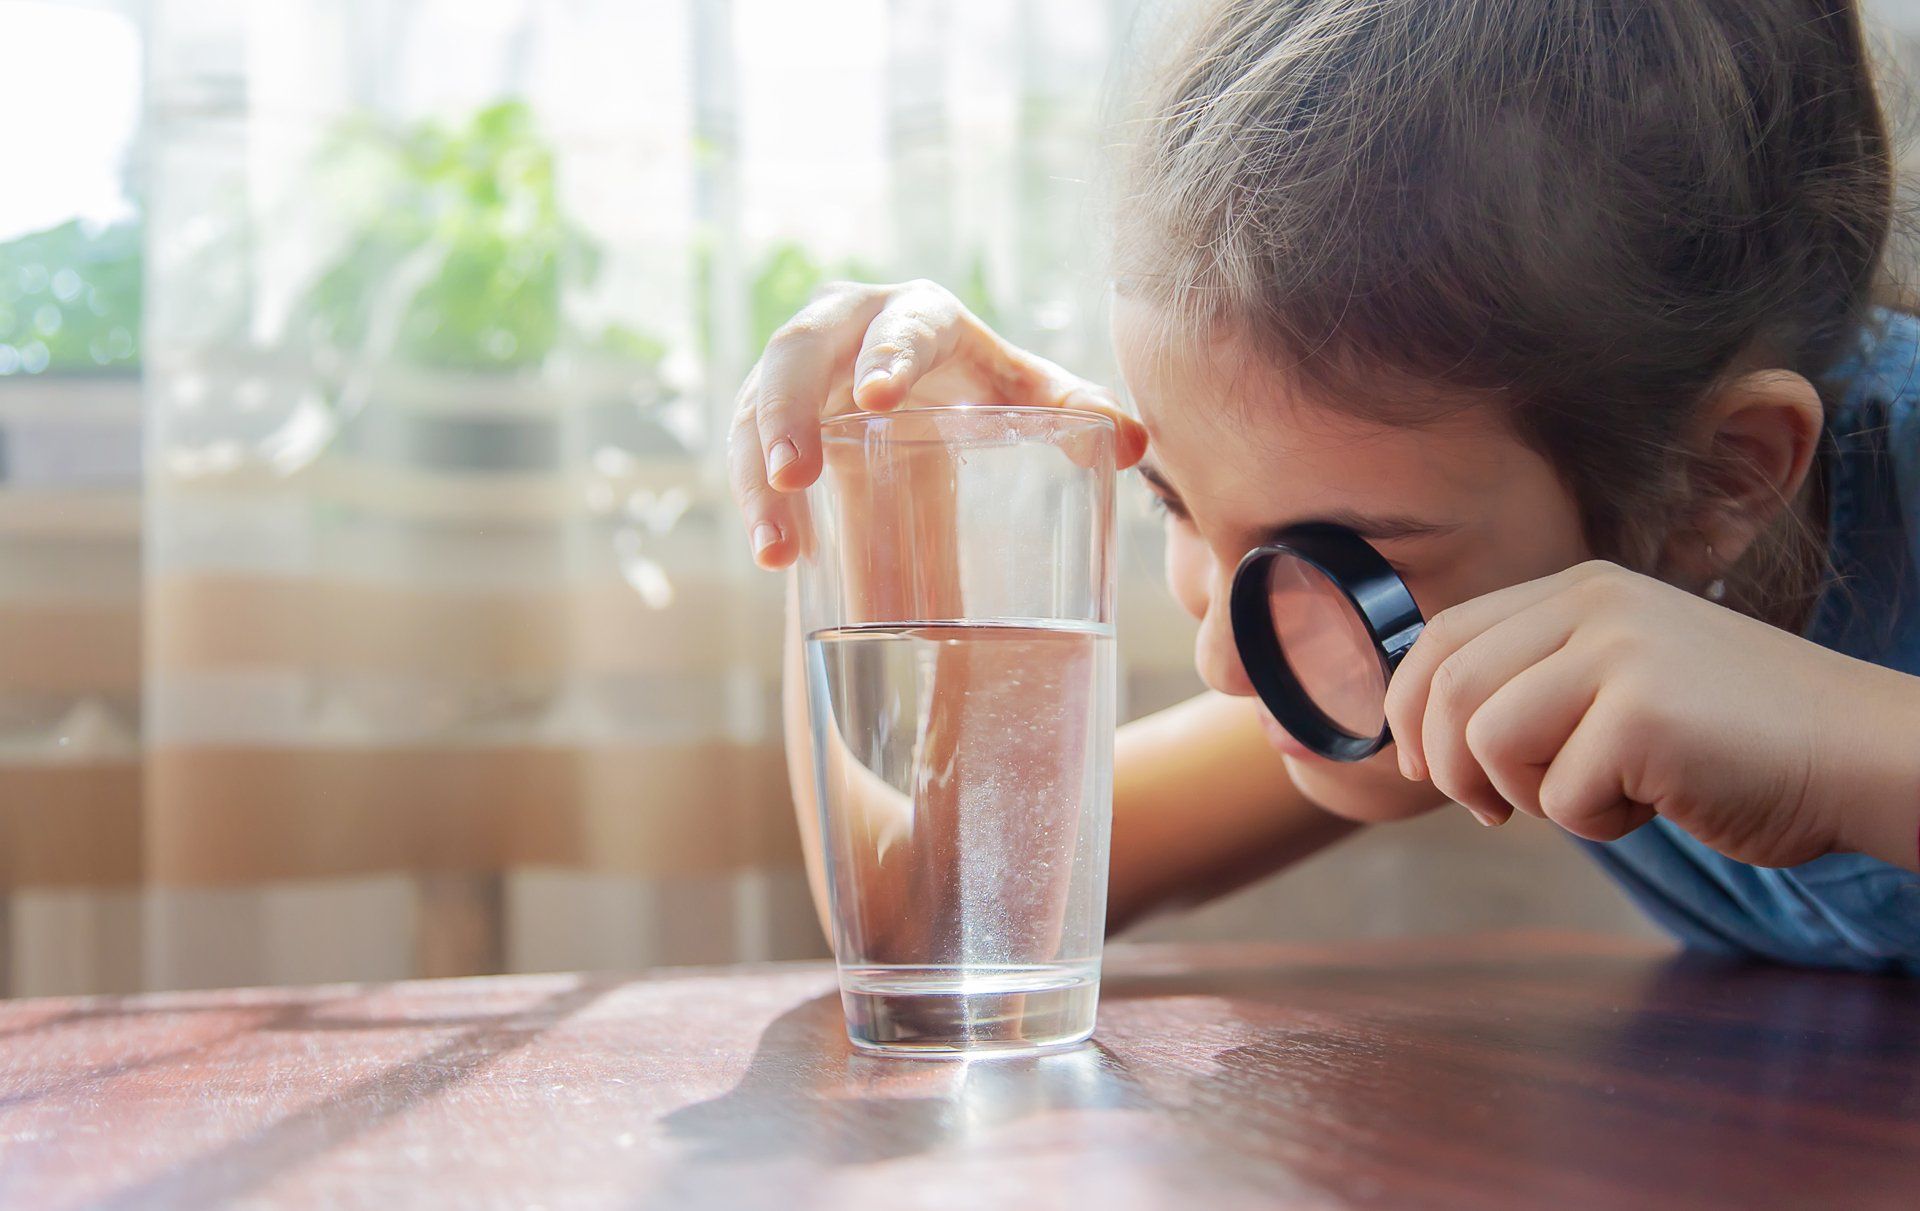 The child examines the water with a magnifying glass in a glass.